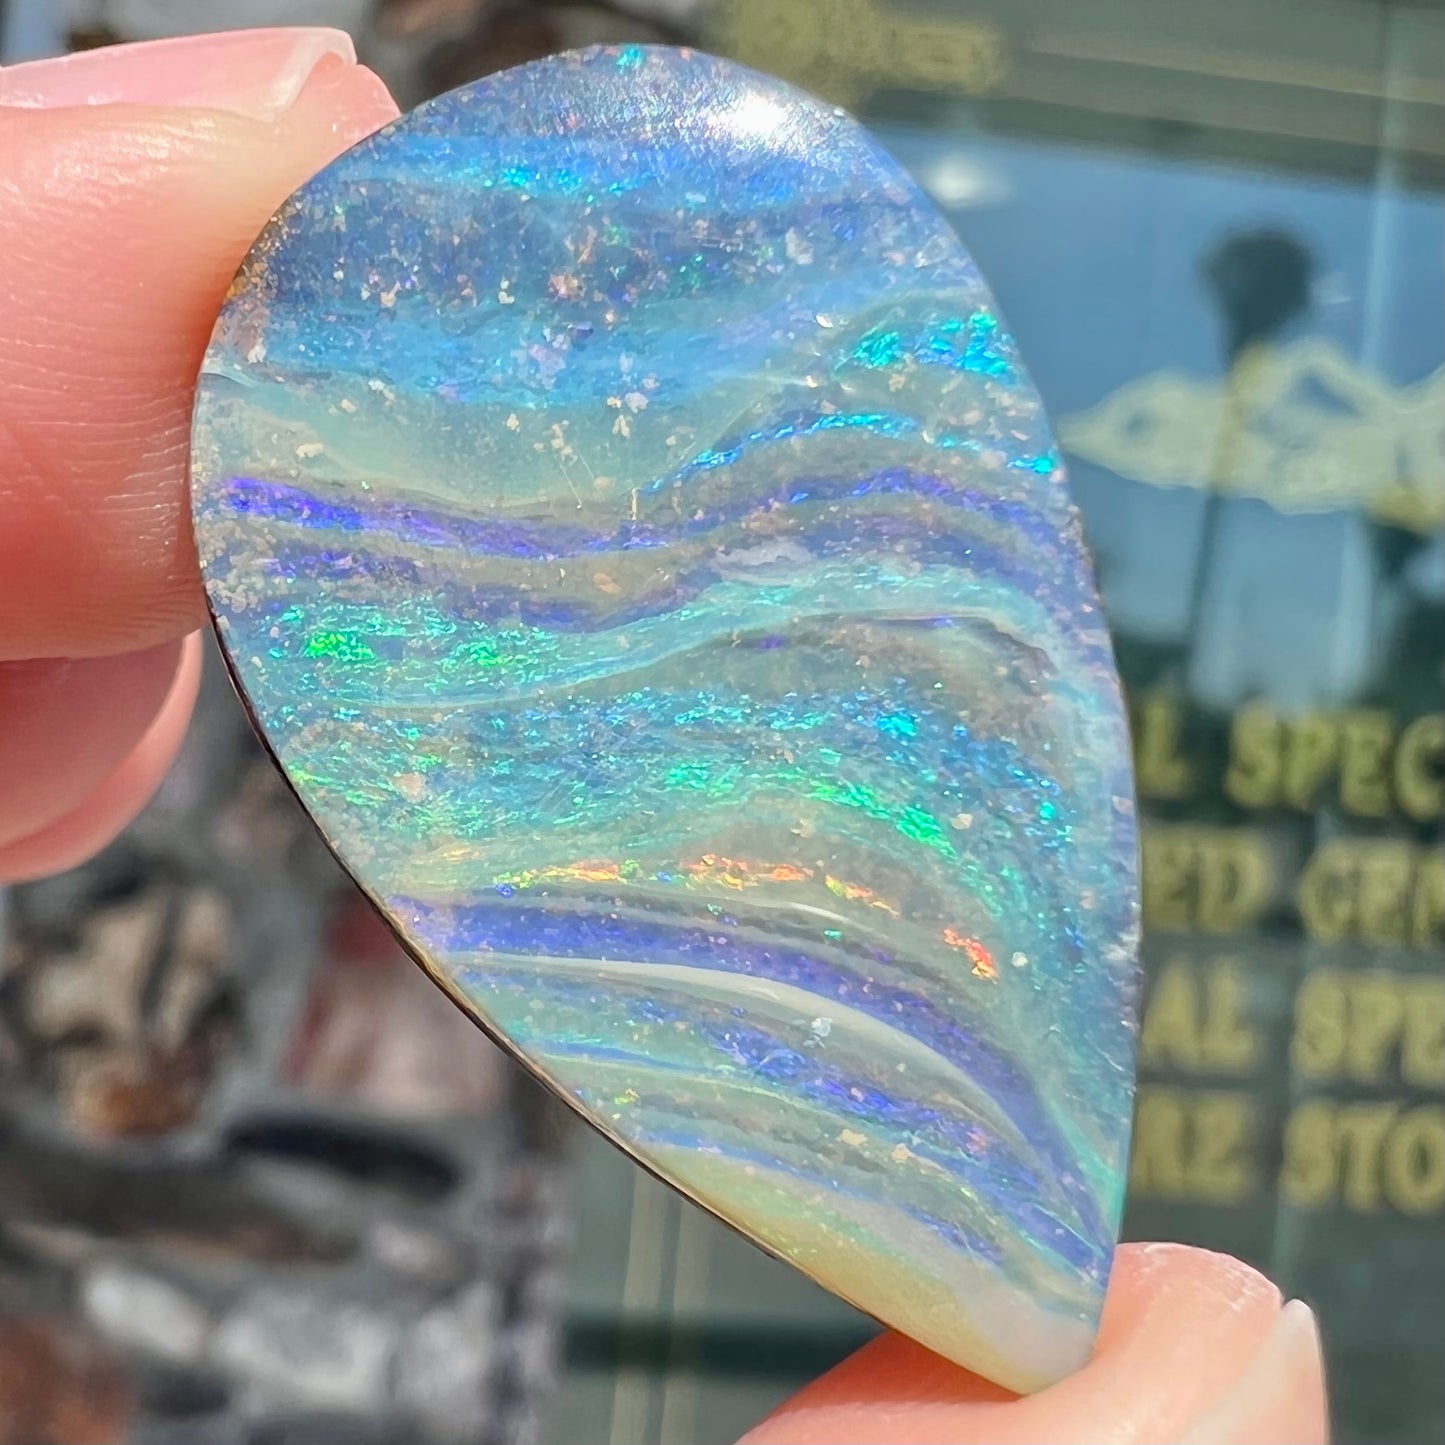 A loose, pear shaped boulder opal stone from Quilpie, Australia.  The stone is predominantly blue, green, and purple with red and orange undertones.